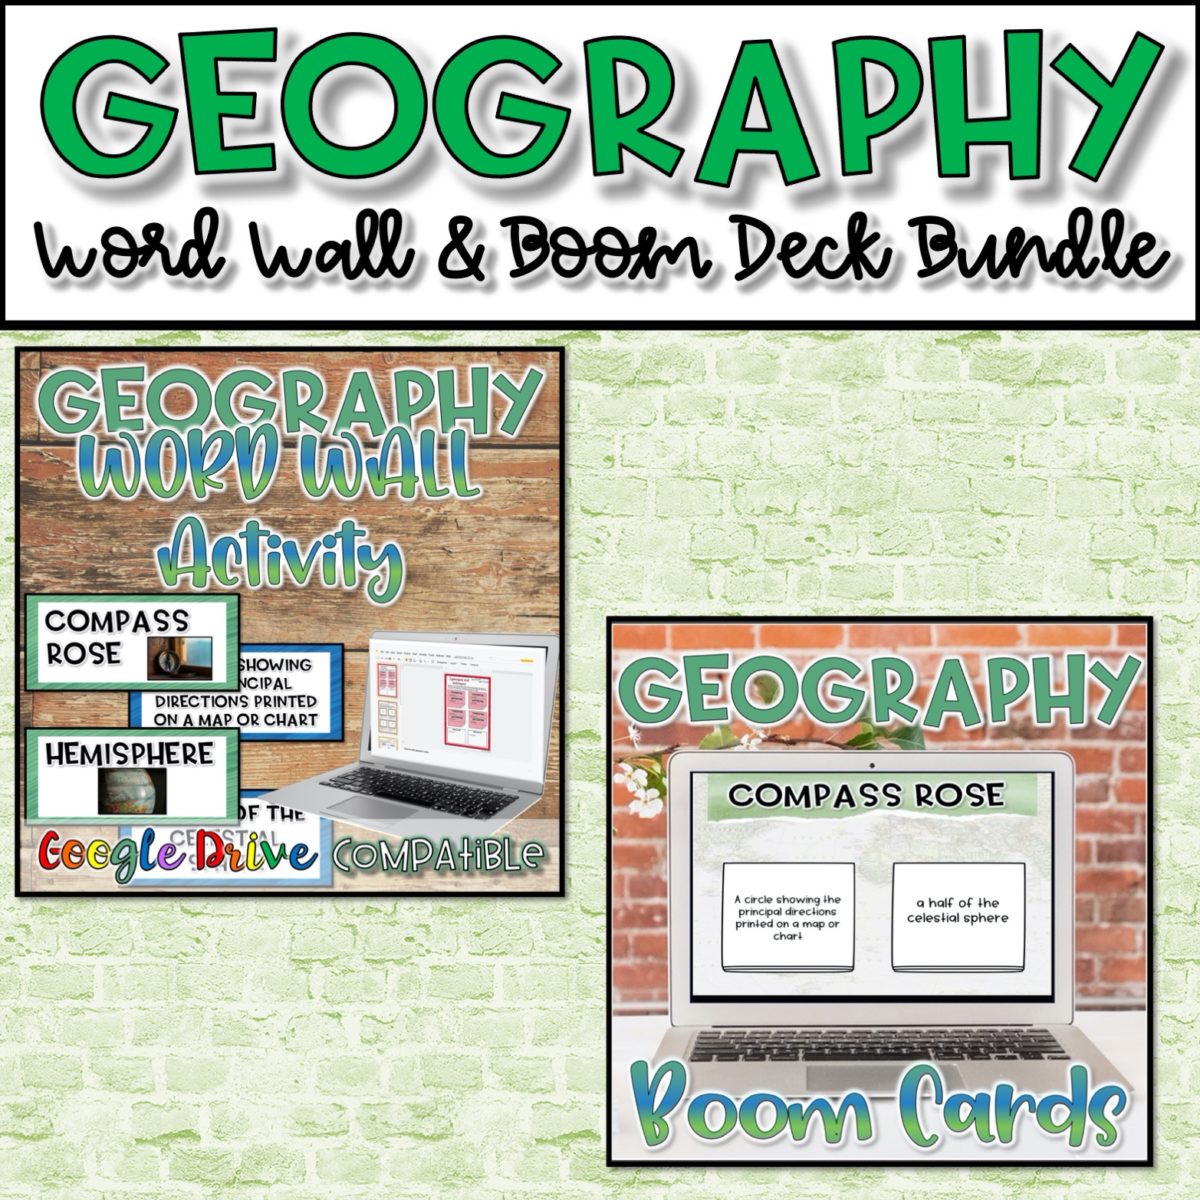 geography_word-wall_Boom_Deck_Vocabulary